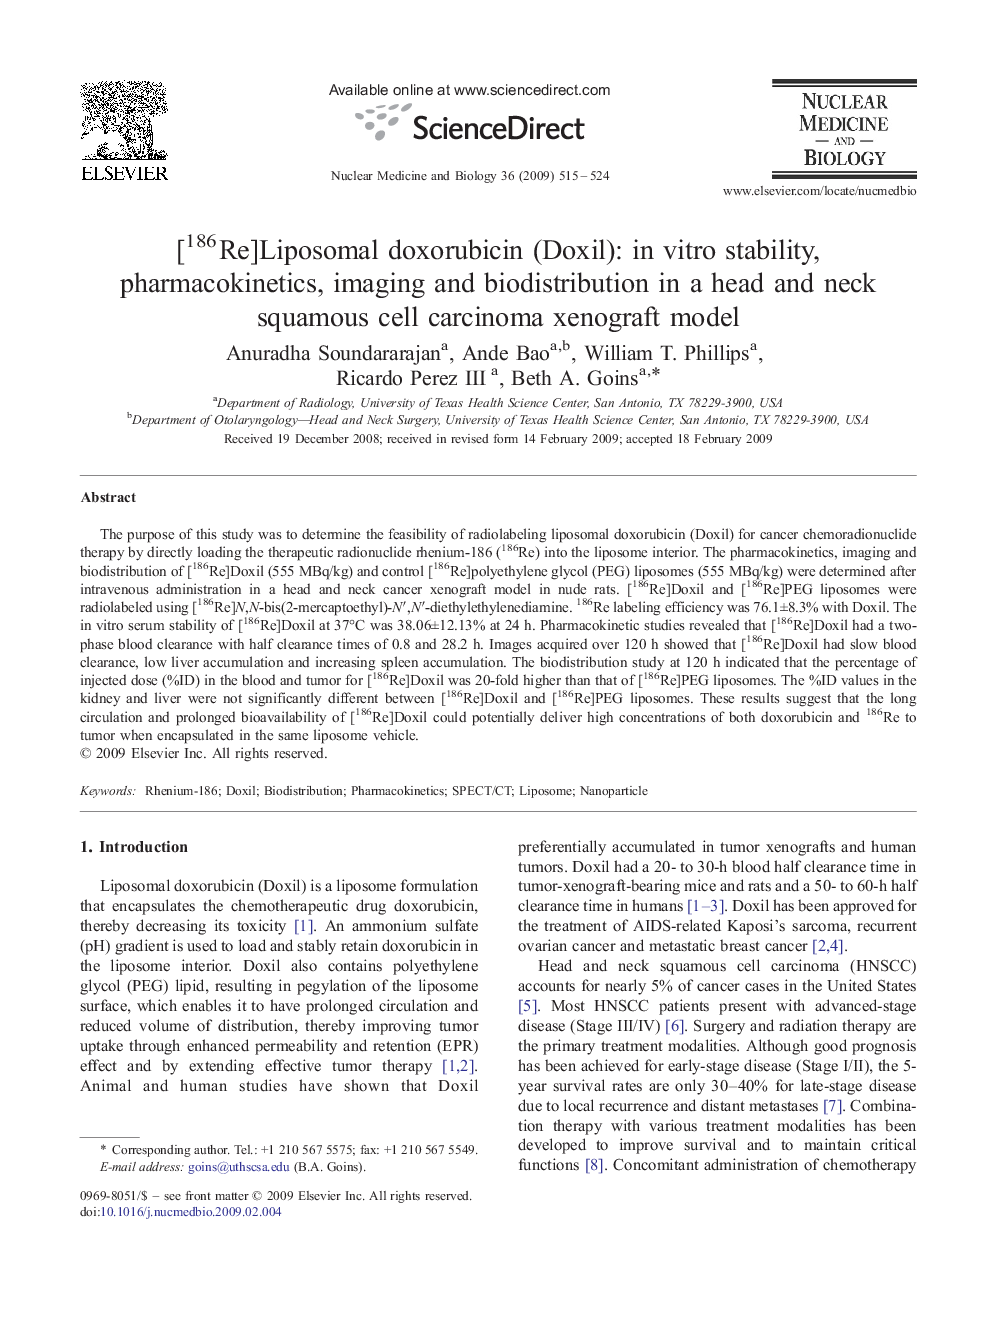 [186Re]Liposomal doxorubicin (Doxil): in vitro stability, pharmacokinetics, imaging and biodistribution in a head and neck squamous cell carcinoma xenograft model